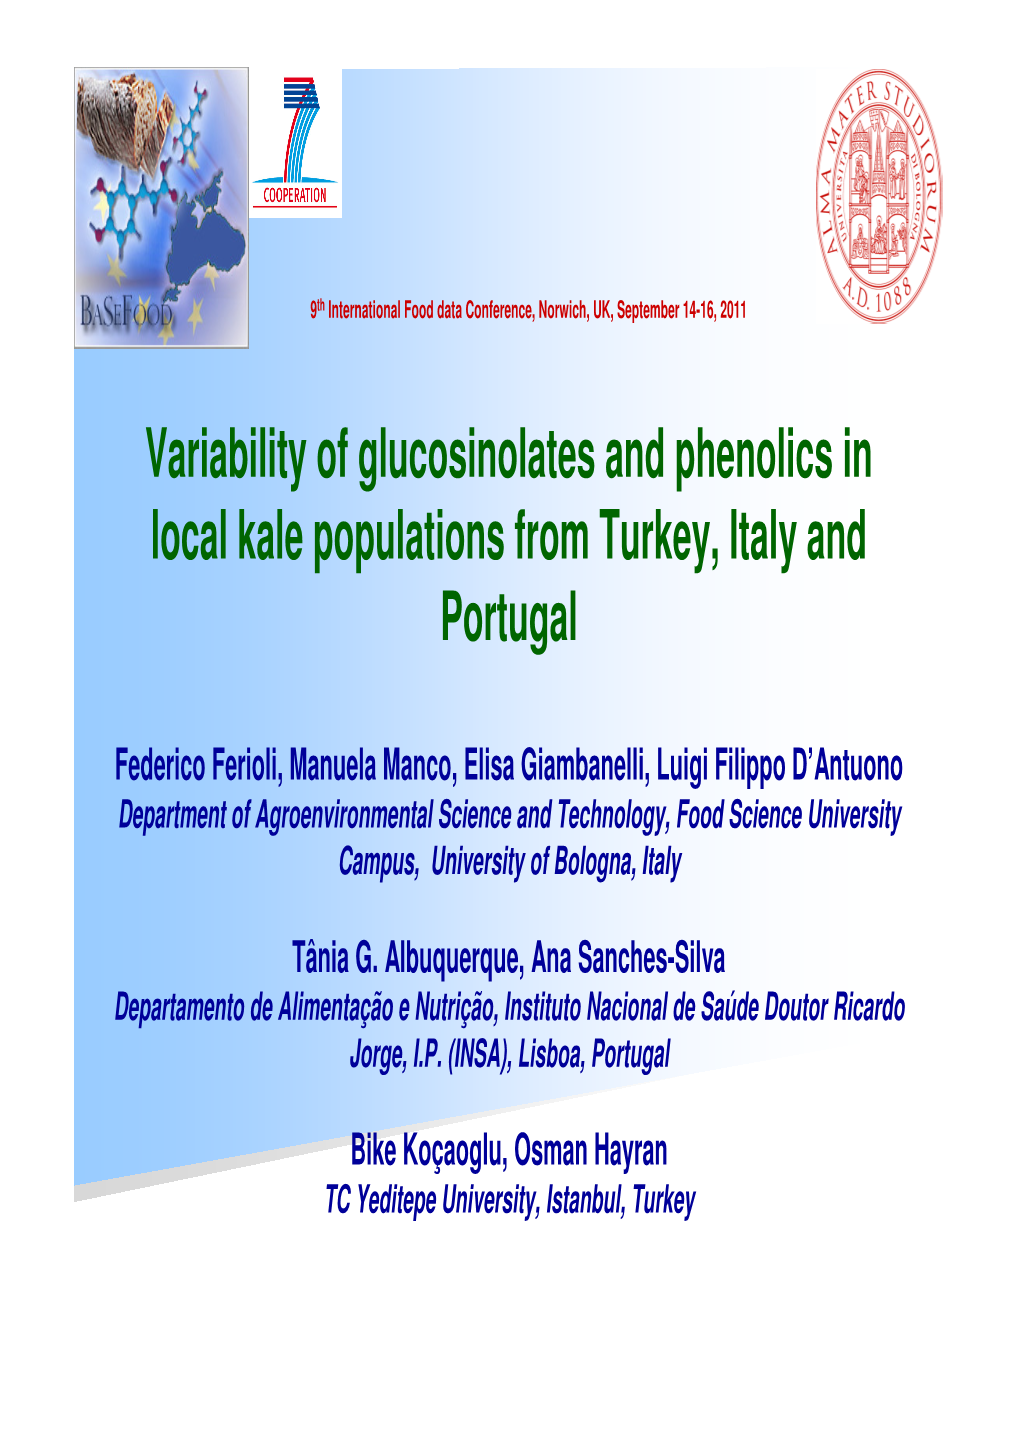 Variability of Glucosinolates and Phenolics in Local Kale Populations from Turkey, Italy and Portugal